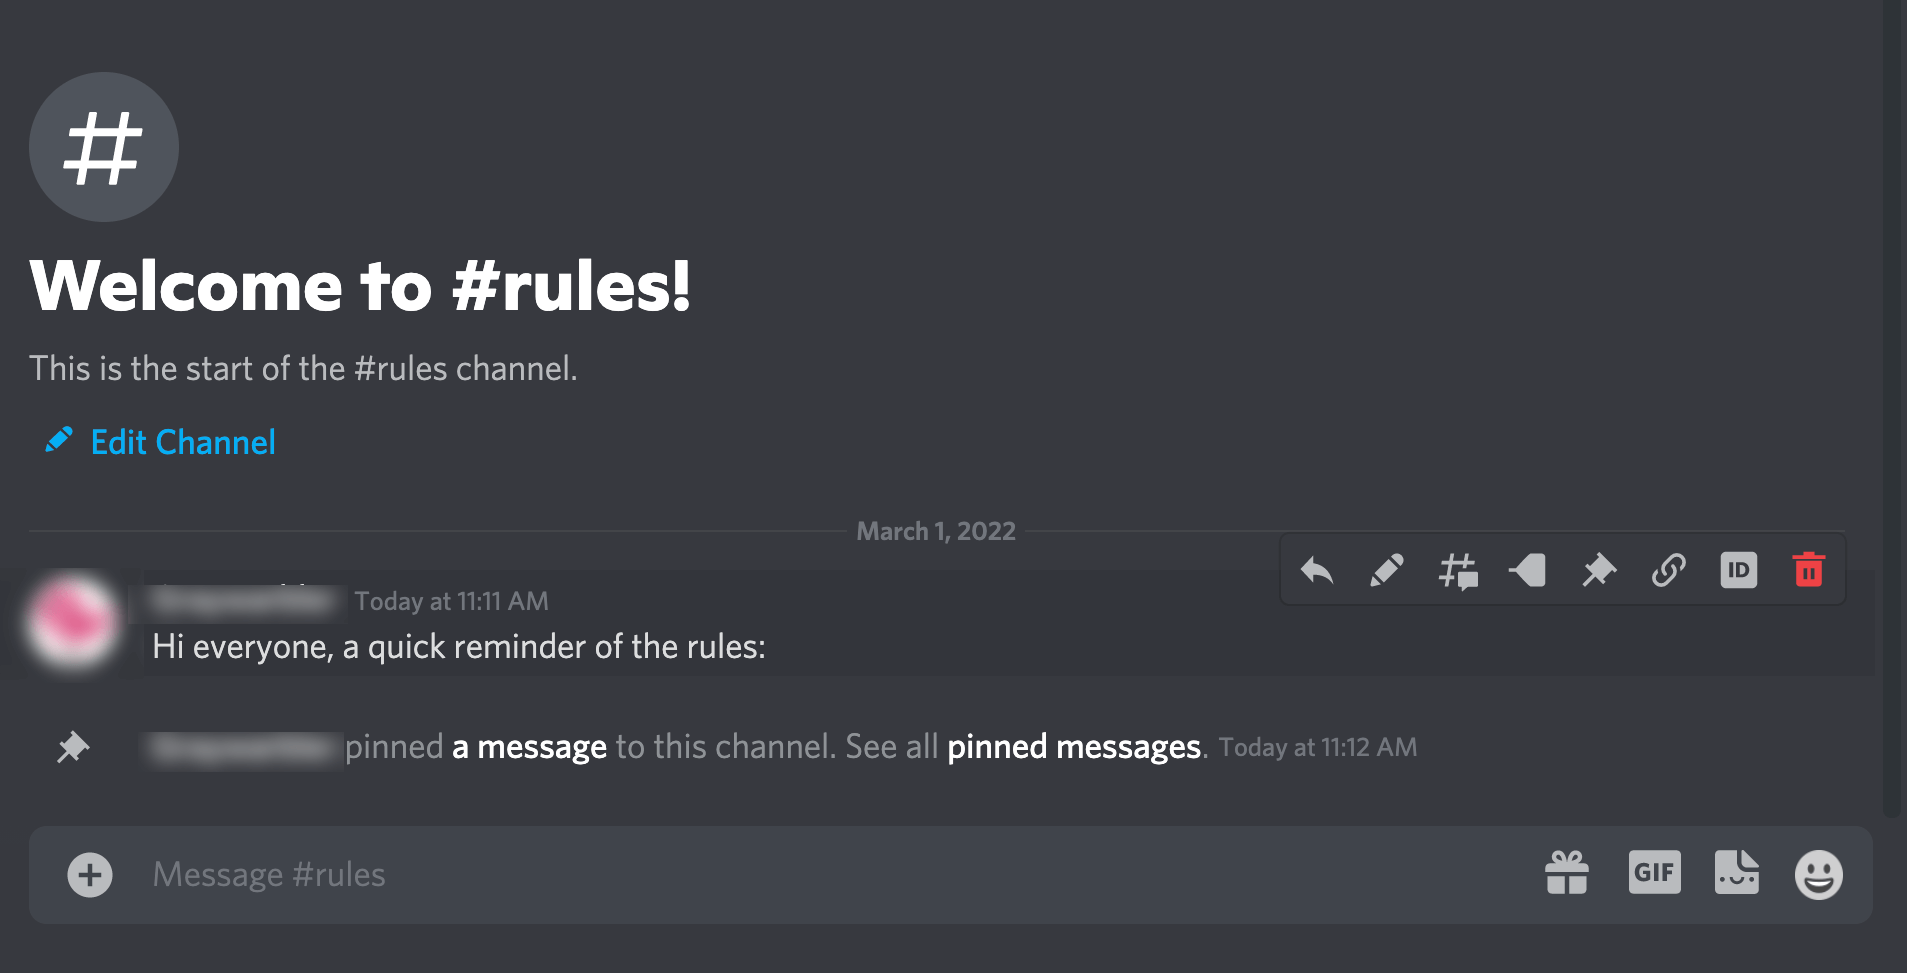 actively chat in your discord server along with others